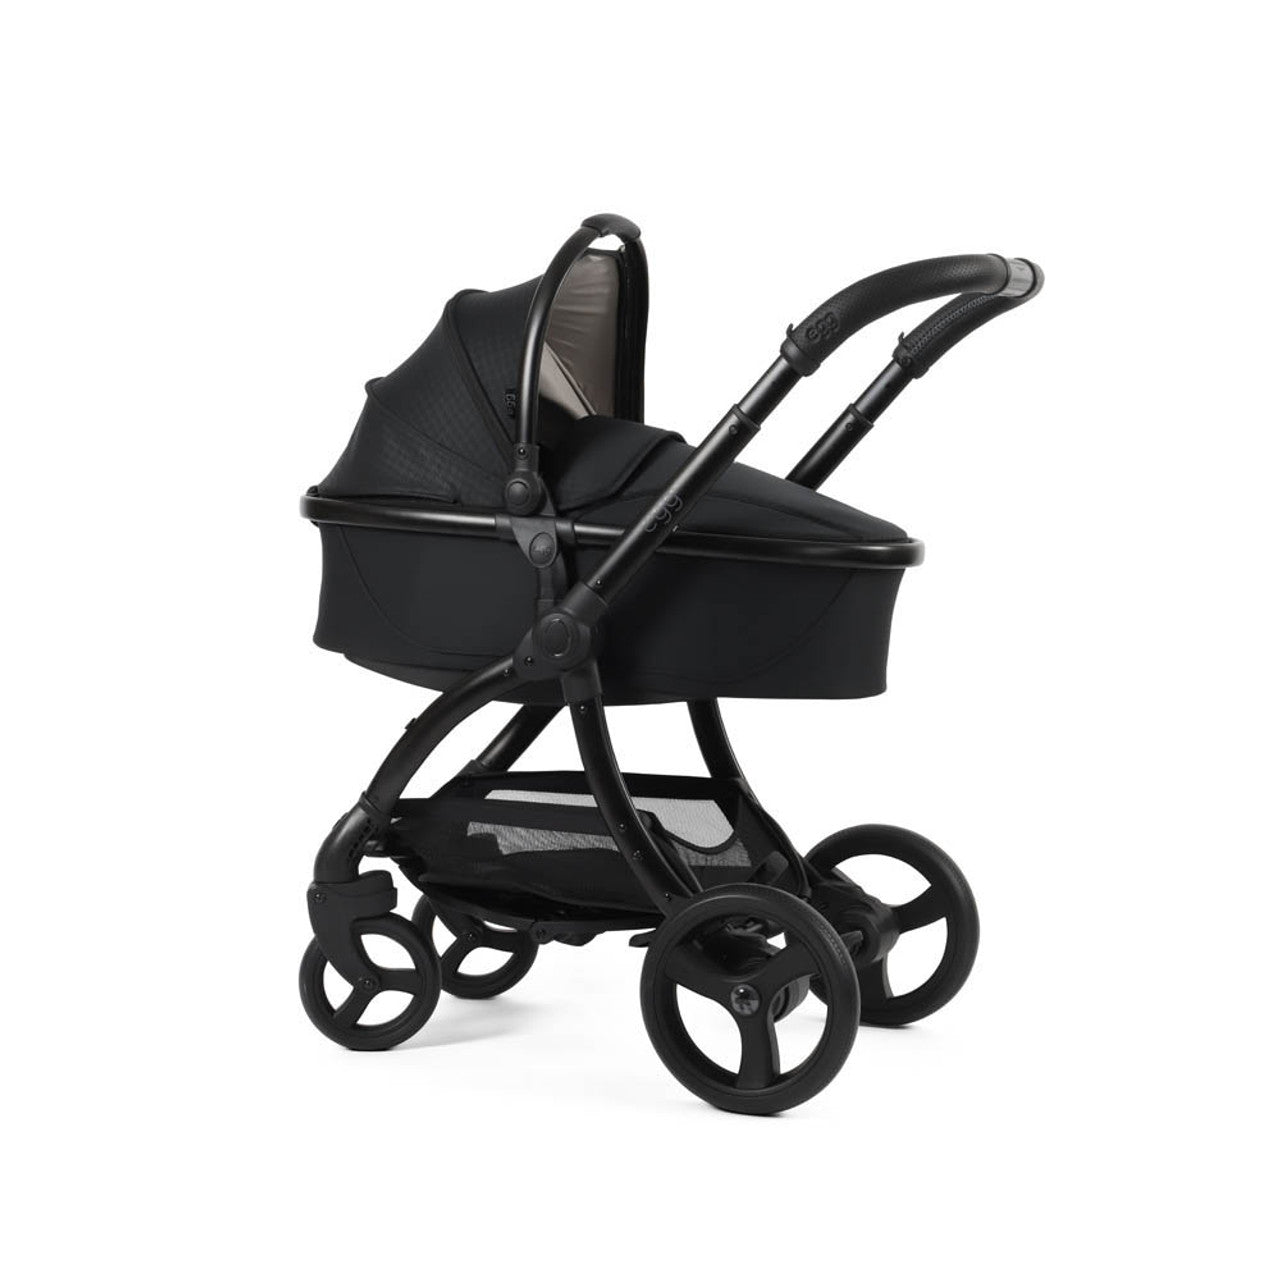 Egg® 3 Luxury Cloud T i-Size Travel System Special Edition Bundle - Houndstooth Black -  | For Your Little One